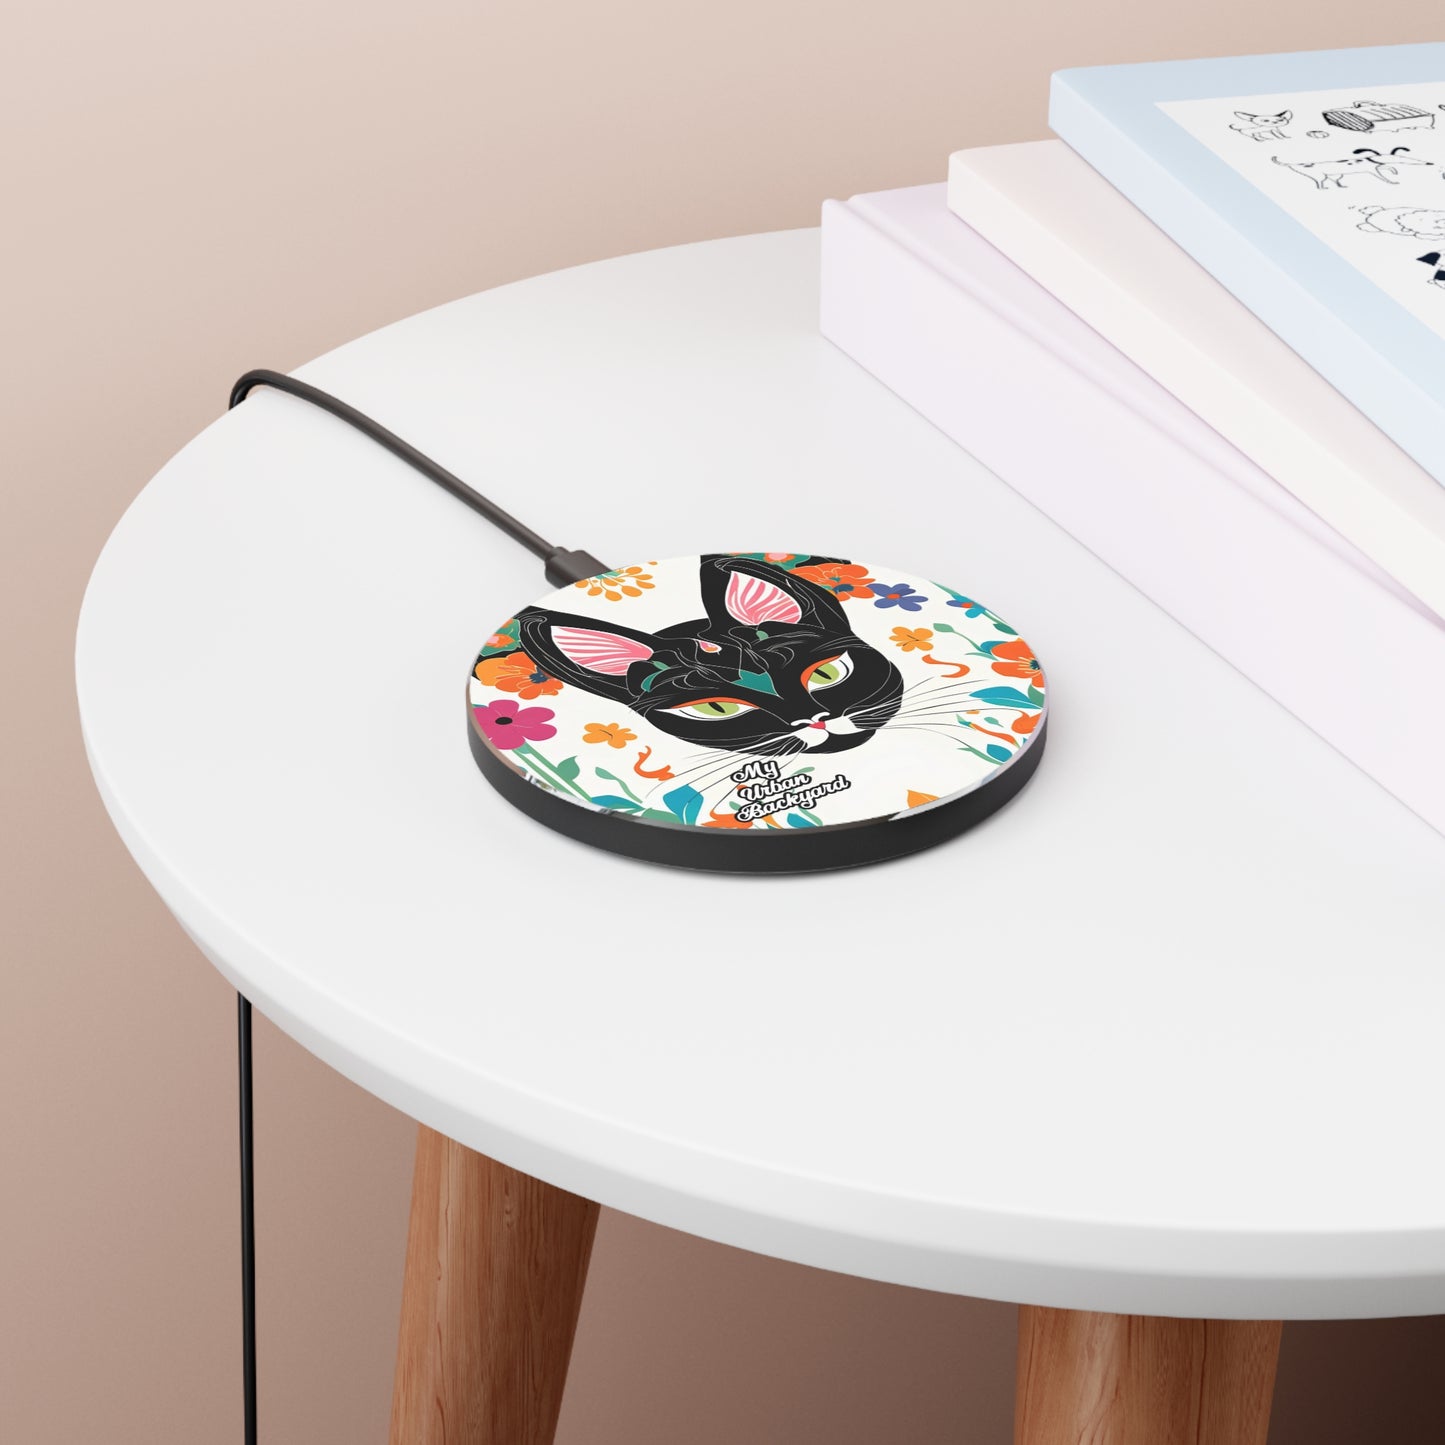 Black Cat with Green Eyes and Flowers, 10W Wireless Charger for iPhone, Android, Earbuds